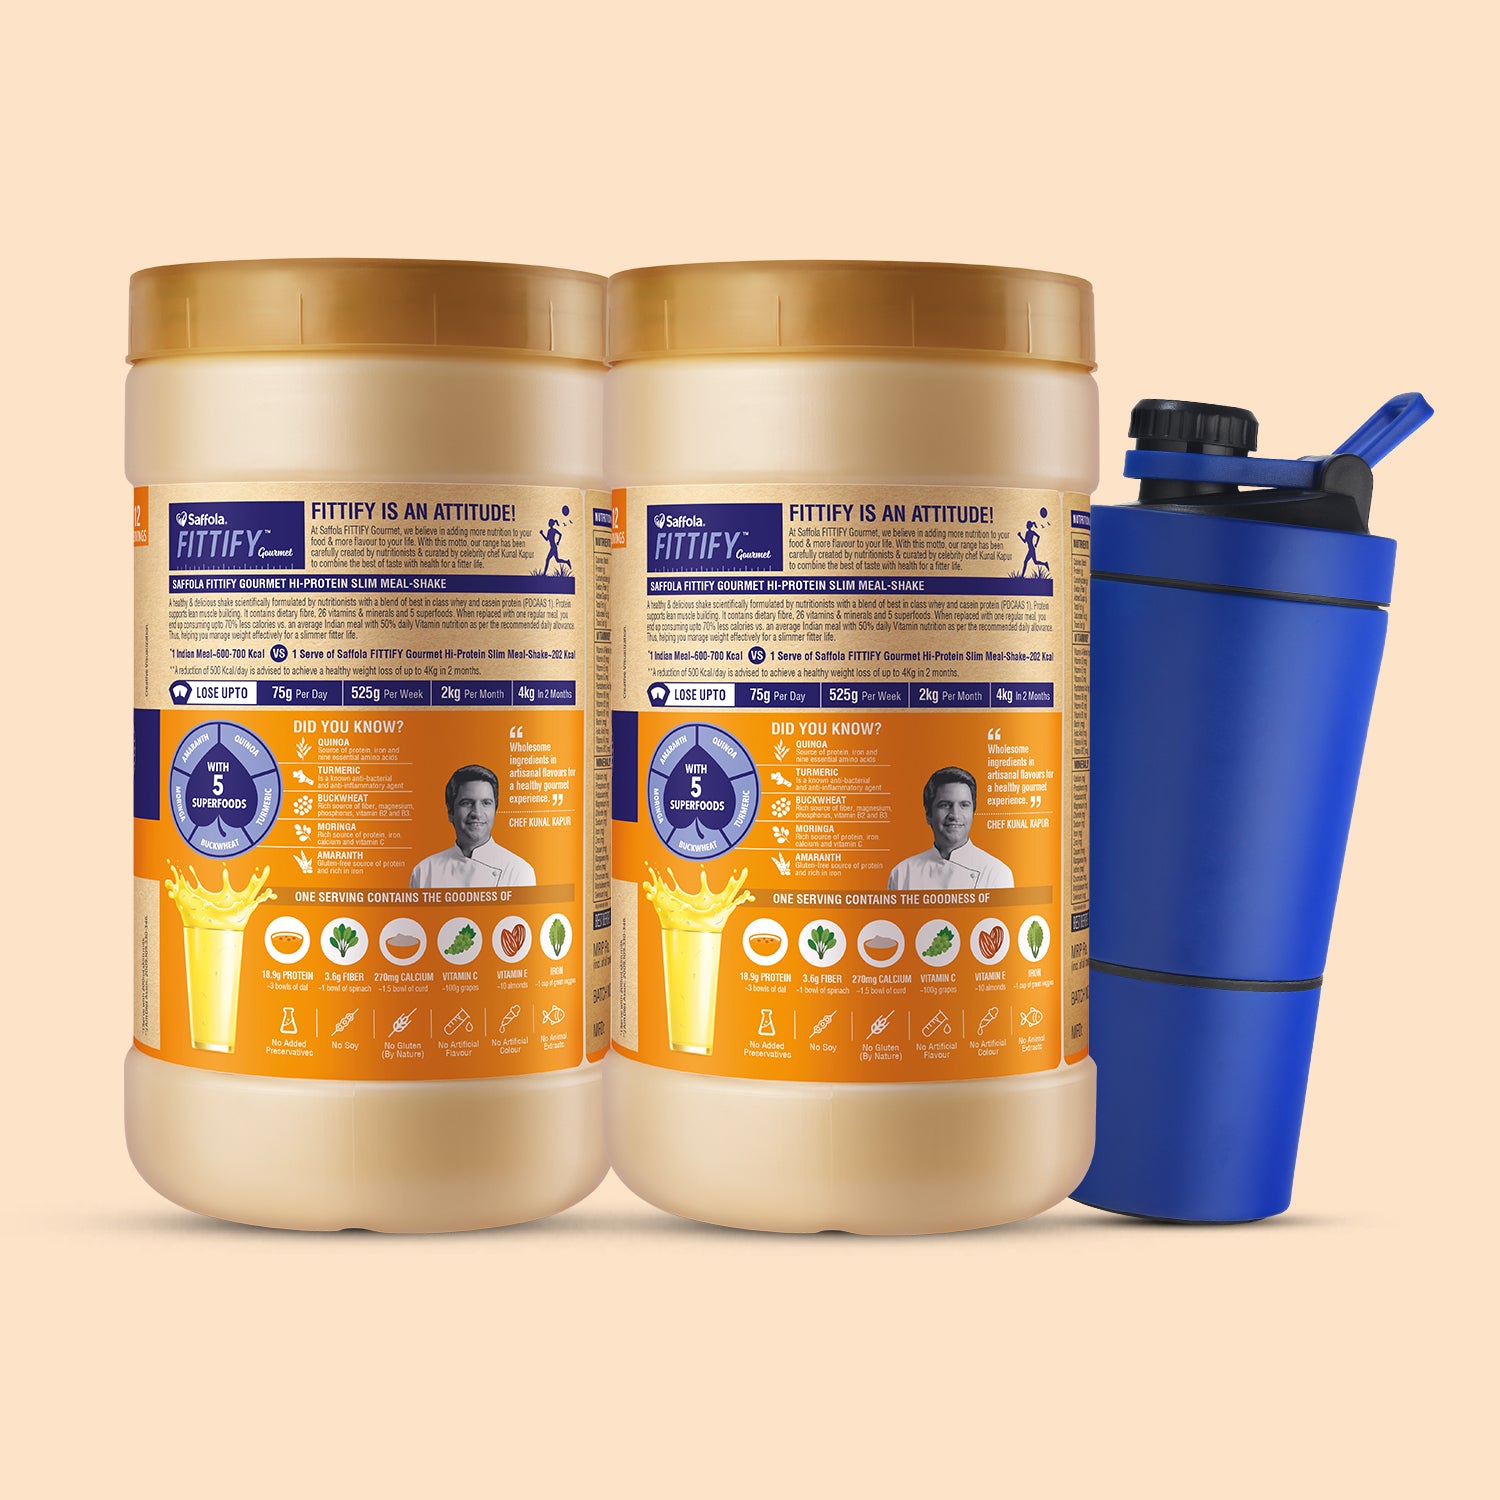 [SALE] Saffola Fittify Hi-Protein Slim Meal Shake Royal Kesar Pista BOGO + Metal Blue Shaker With Compartment 500ml Combo